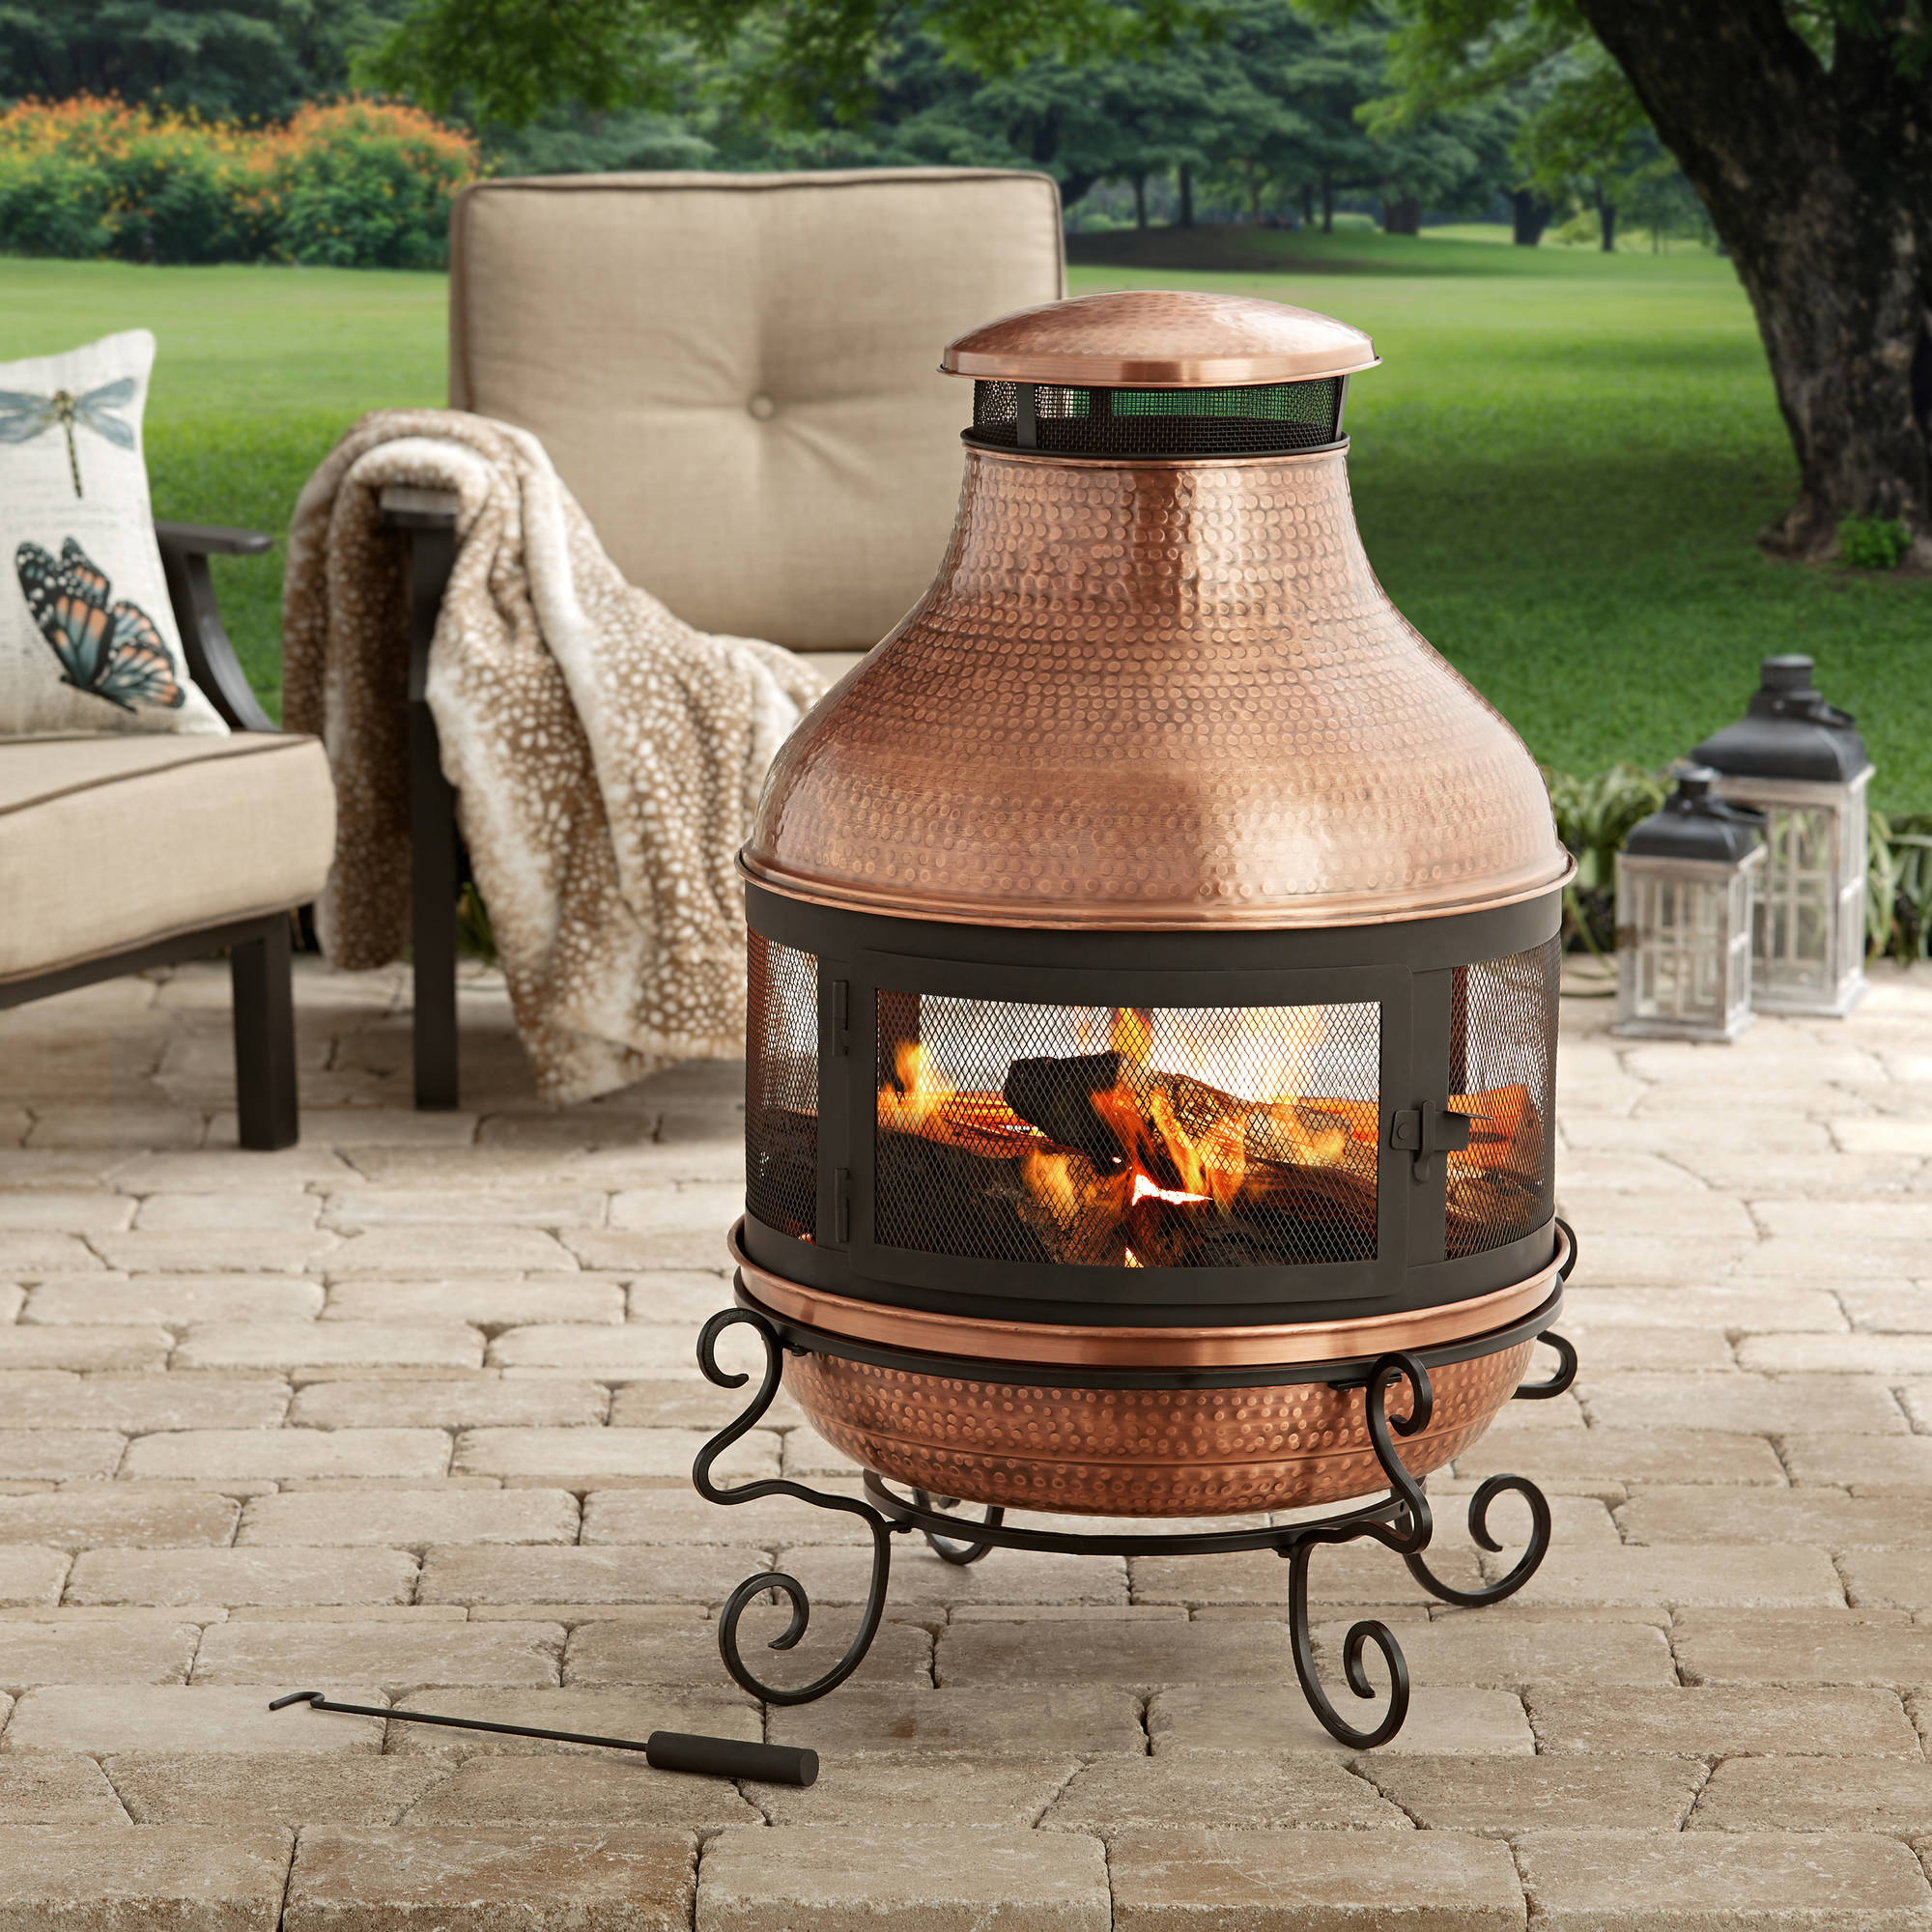 Better Homes and Gardens 39"  Tall Copper Hammered Chiminea Fire Pit ...